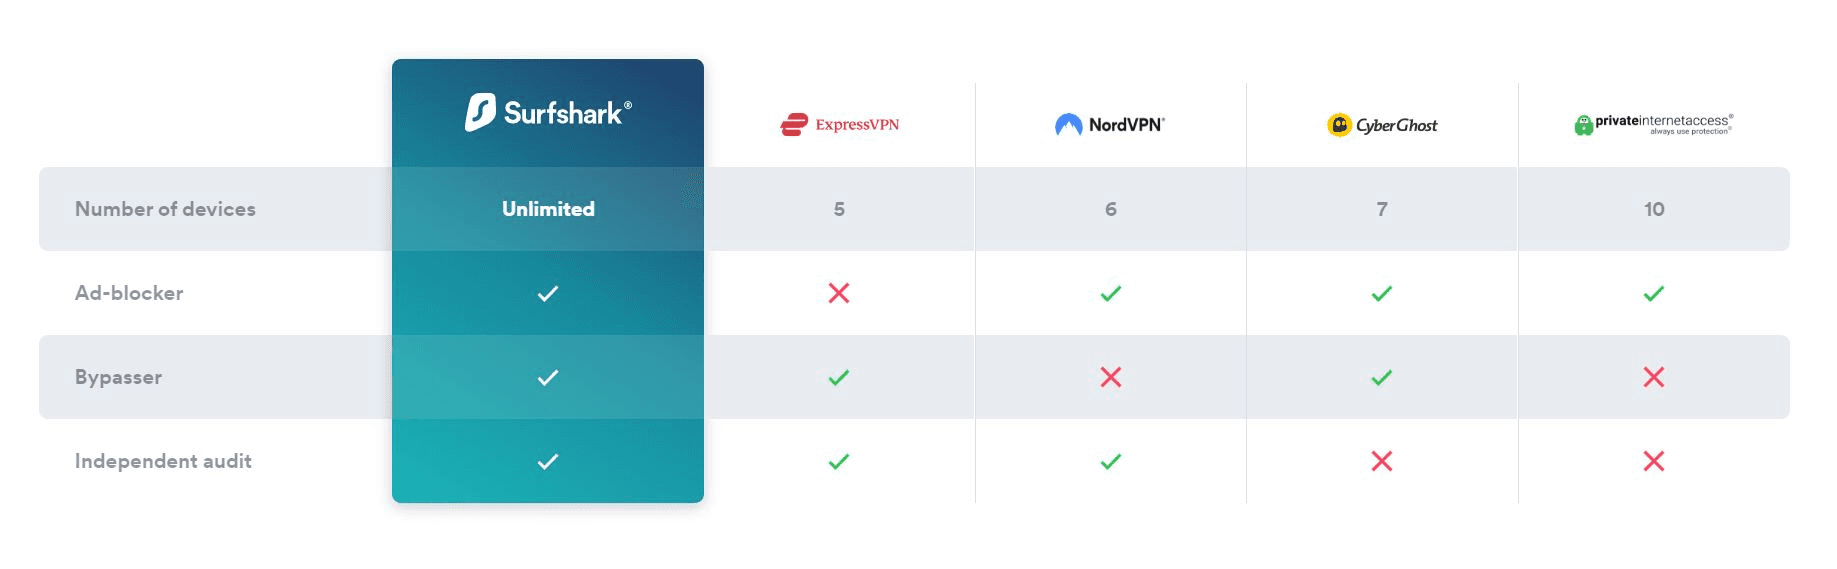 A surfshark comparison to other VPN providers